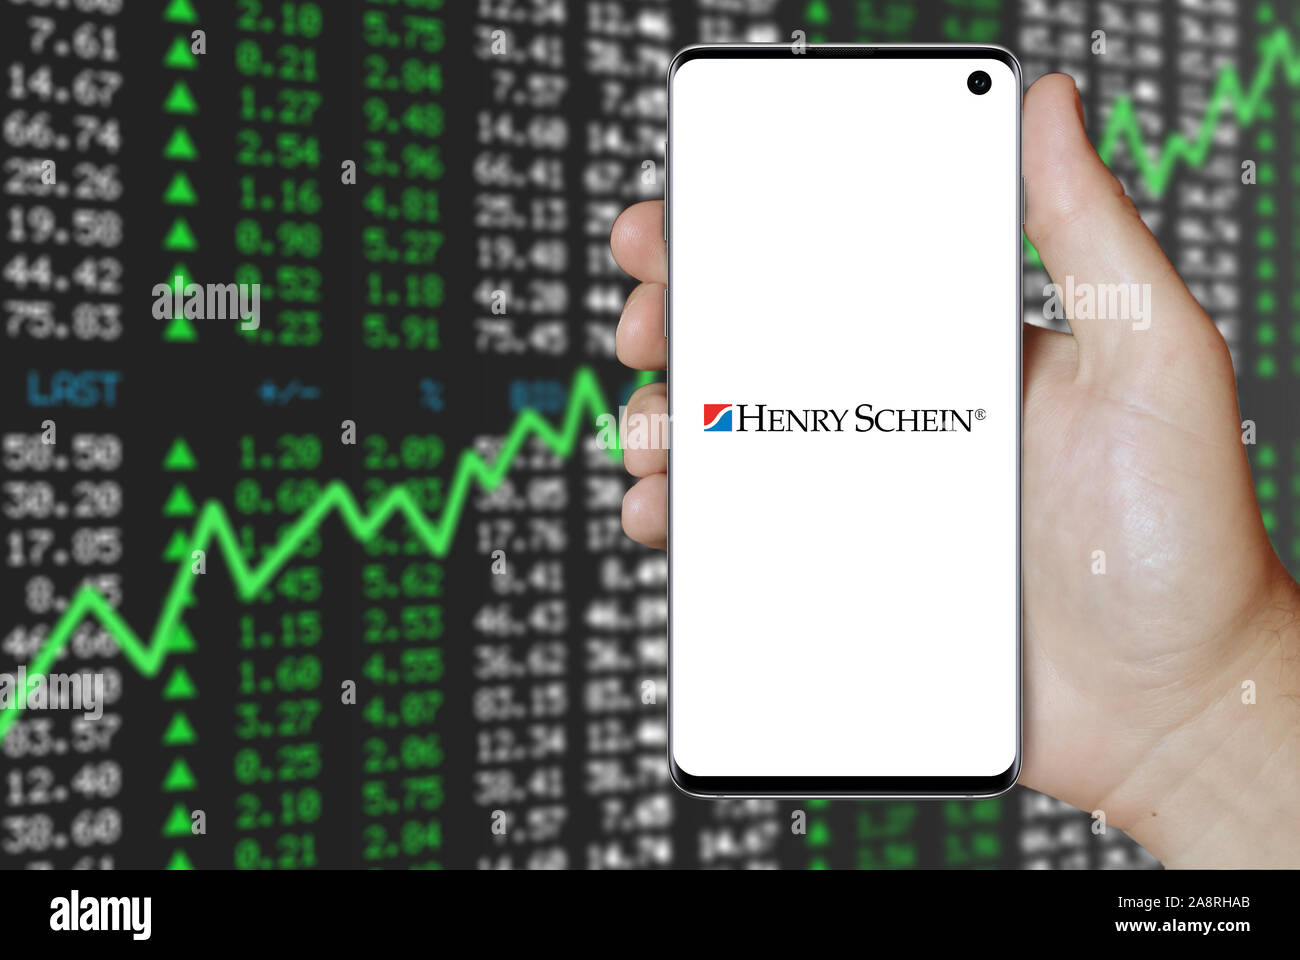 Logo of public company Henry Schein displayed on a smartphone. Positive stock market background. Credit: PIXDUCE Stock Photo